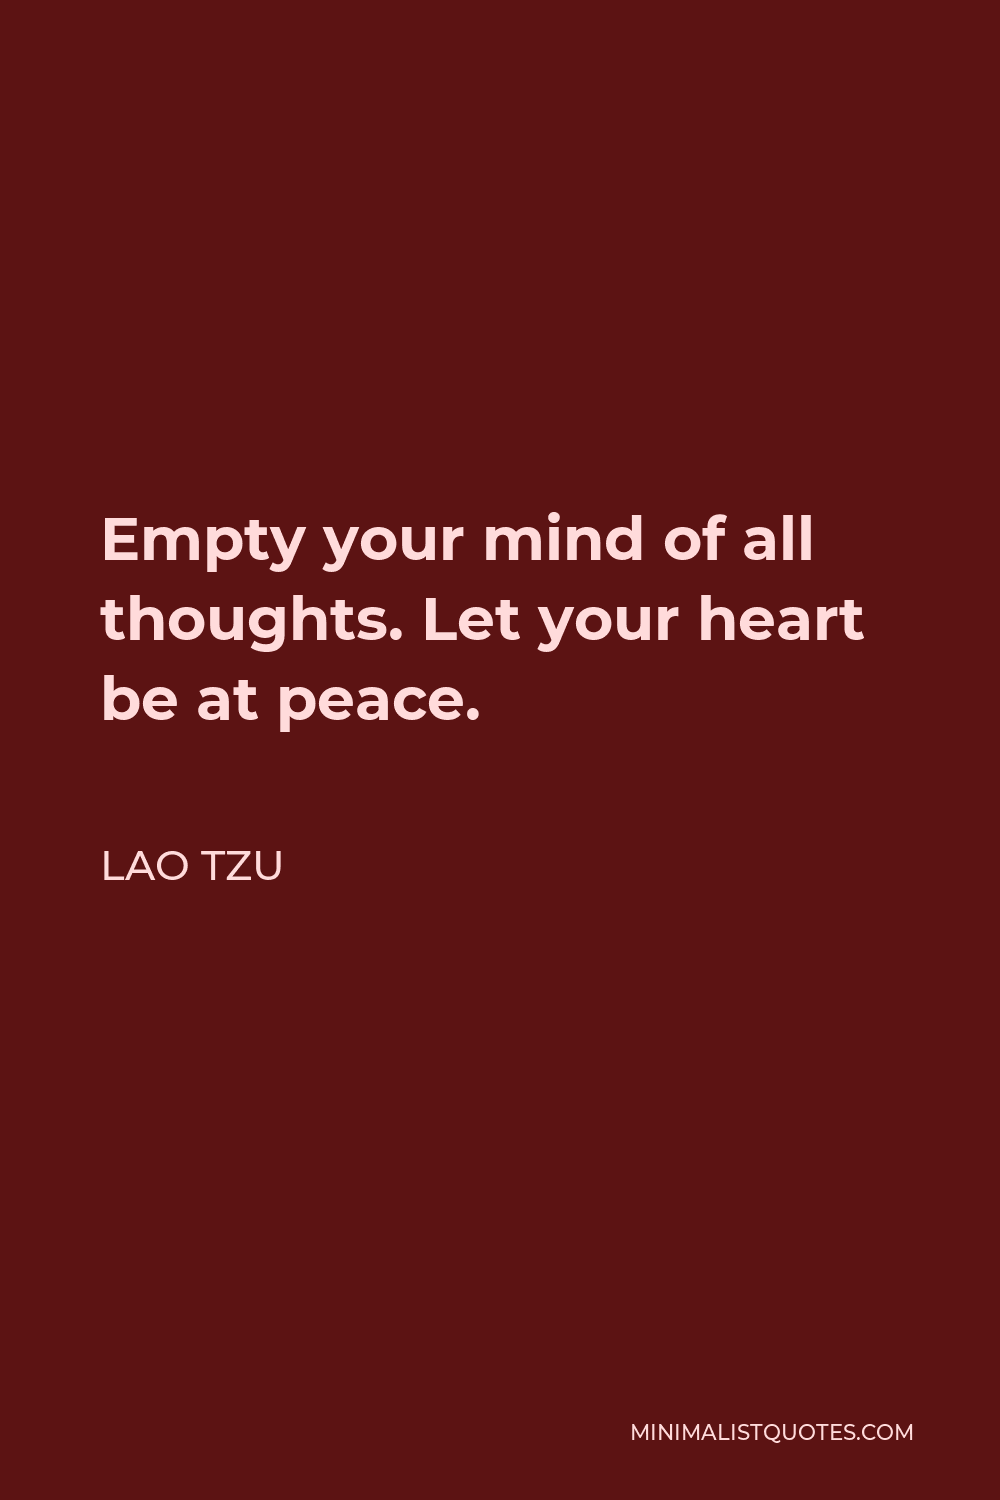 Lao Tzu Quote - Empty your mind of all thoughts. Let your heart be at peace.